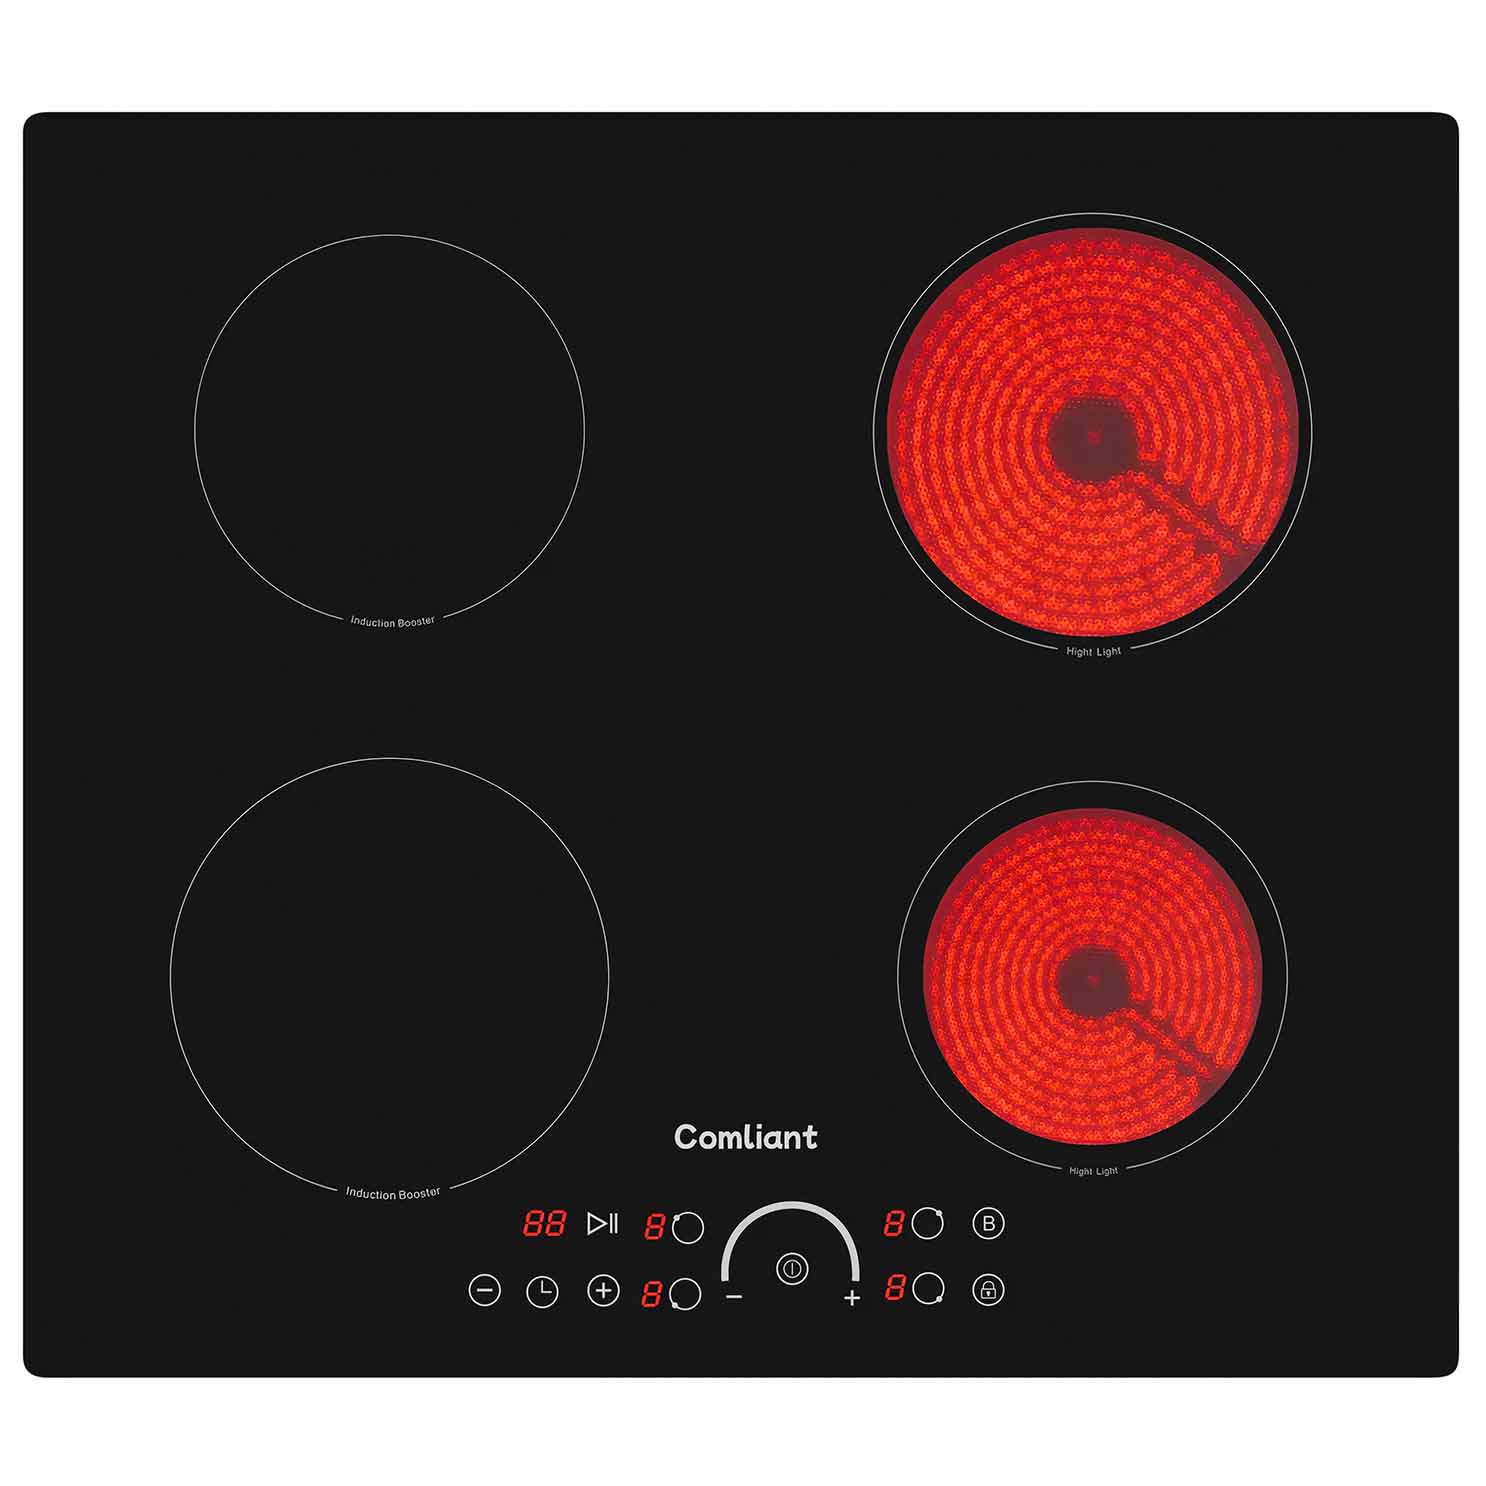 induction and electric cooktop